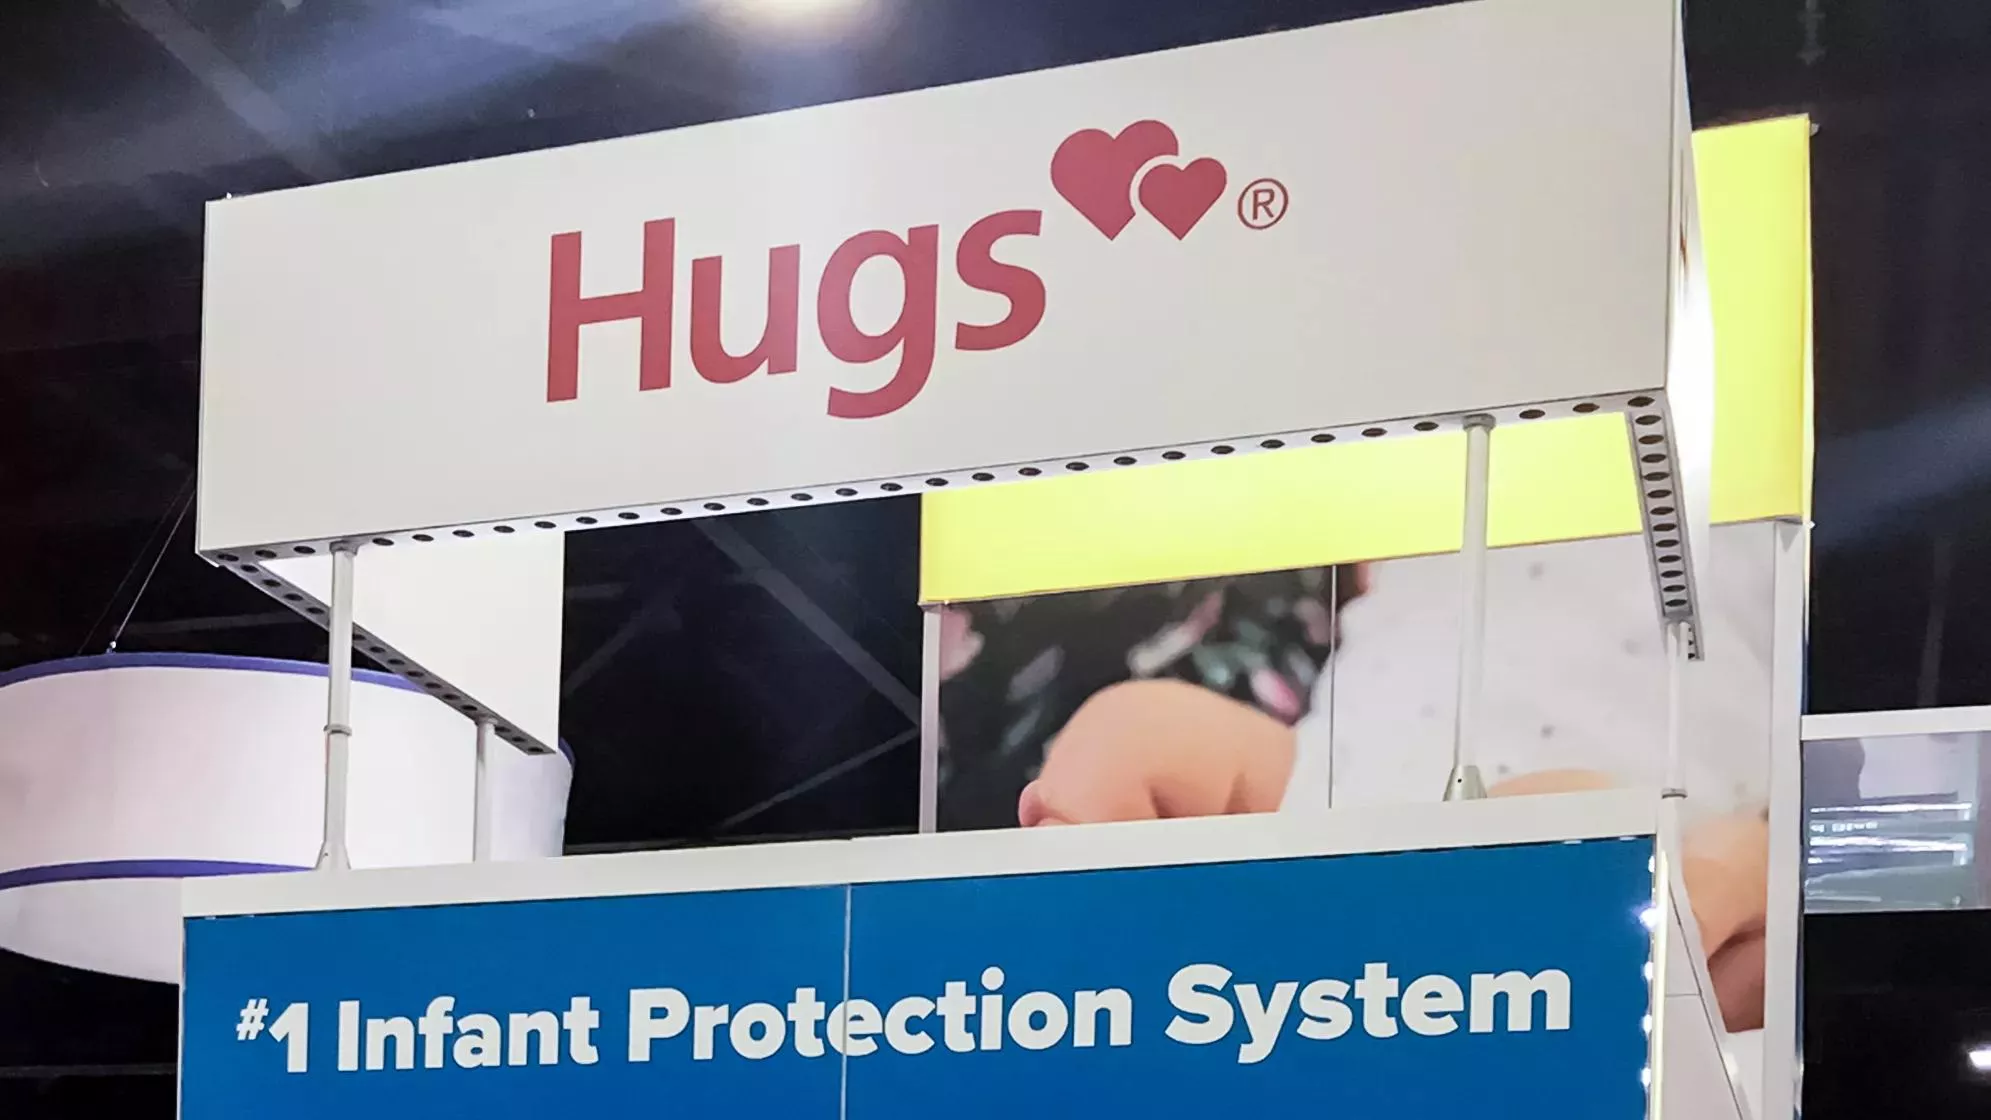 Hugs booth at AWHONN industry event. #1 infant protection system booth graphic.